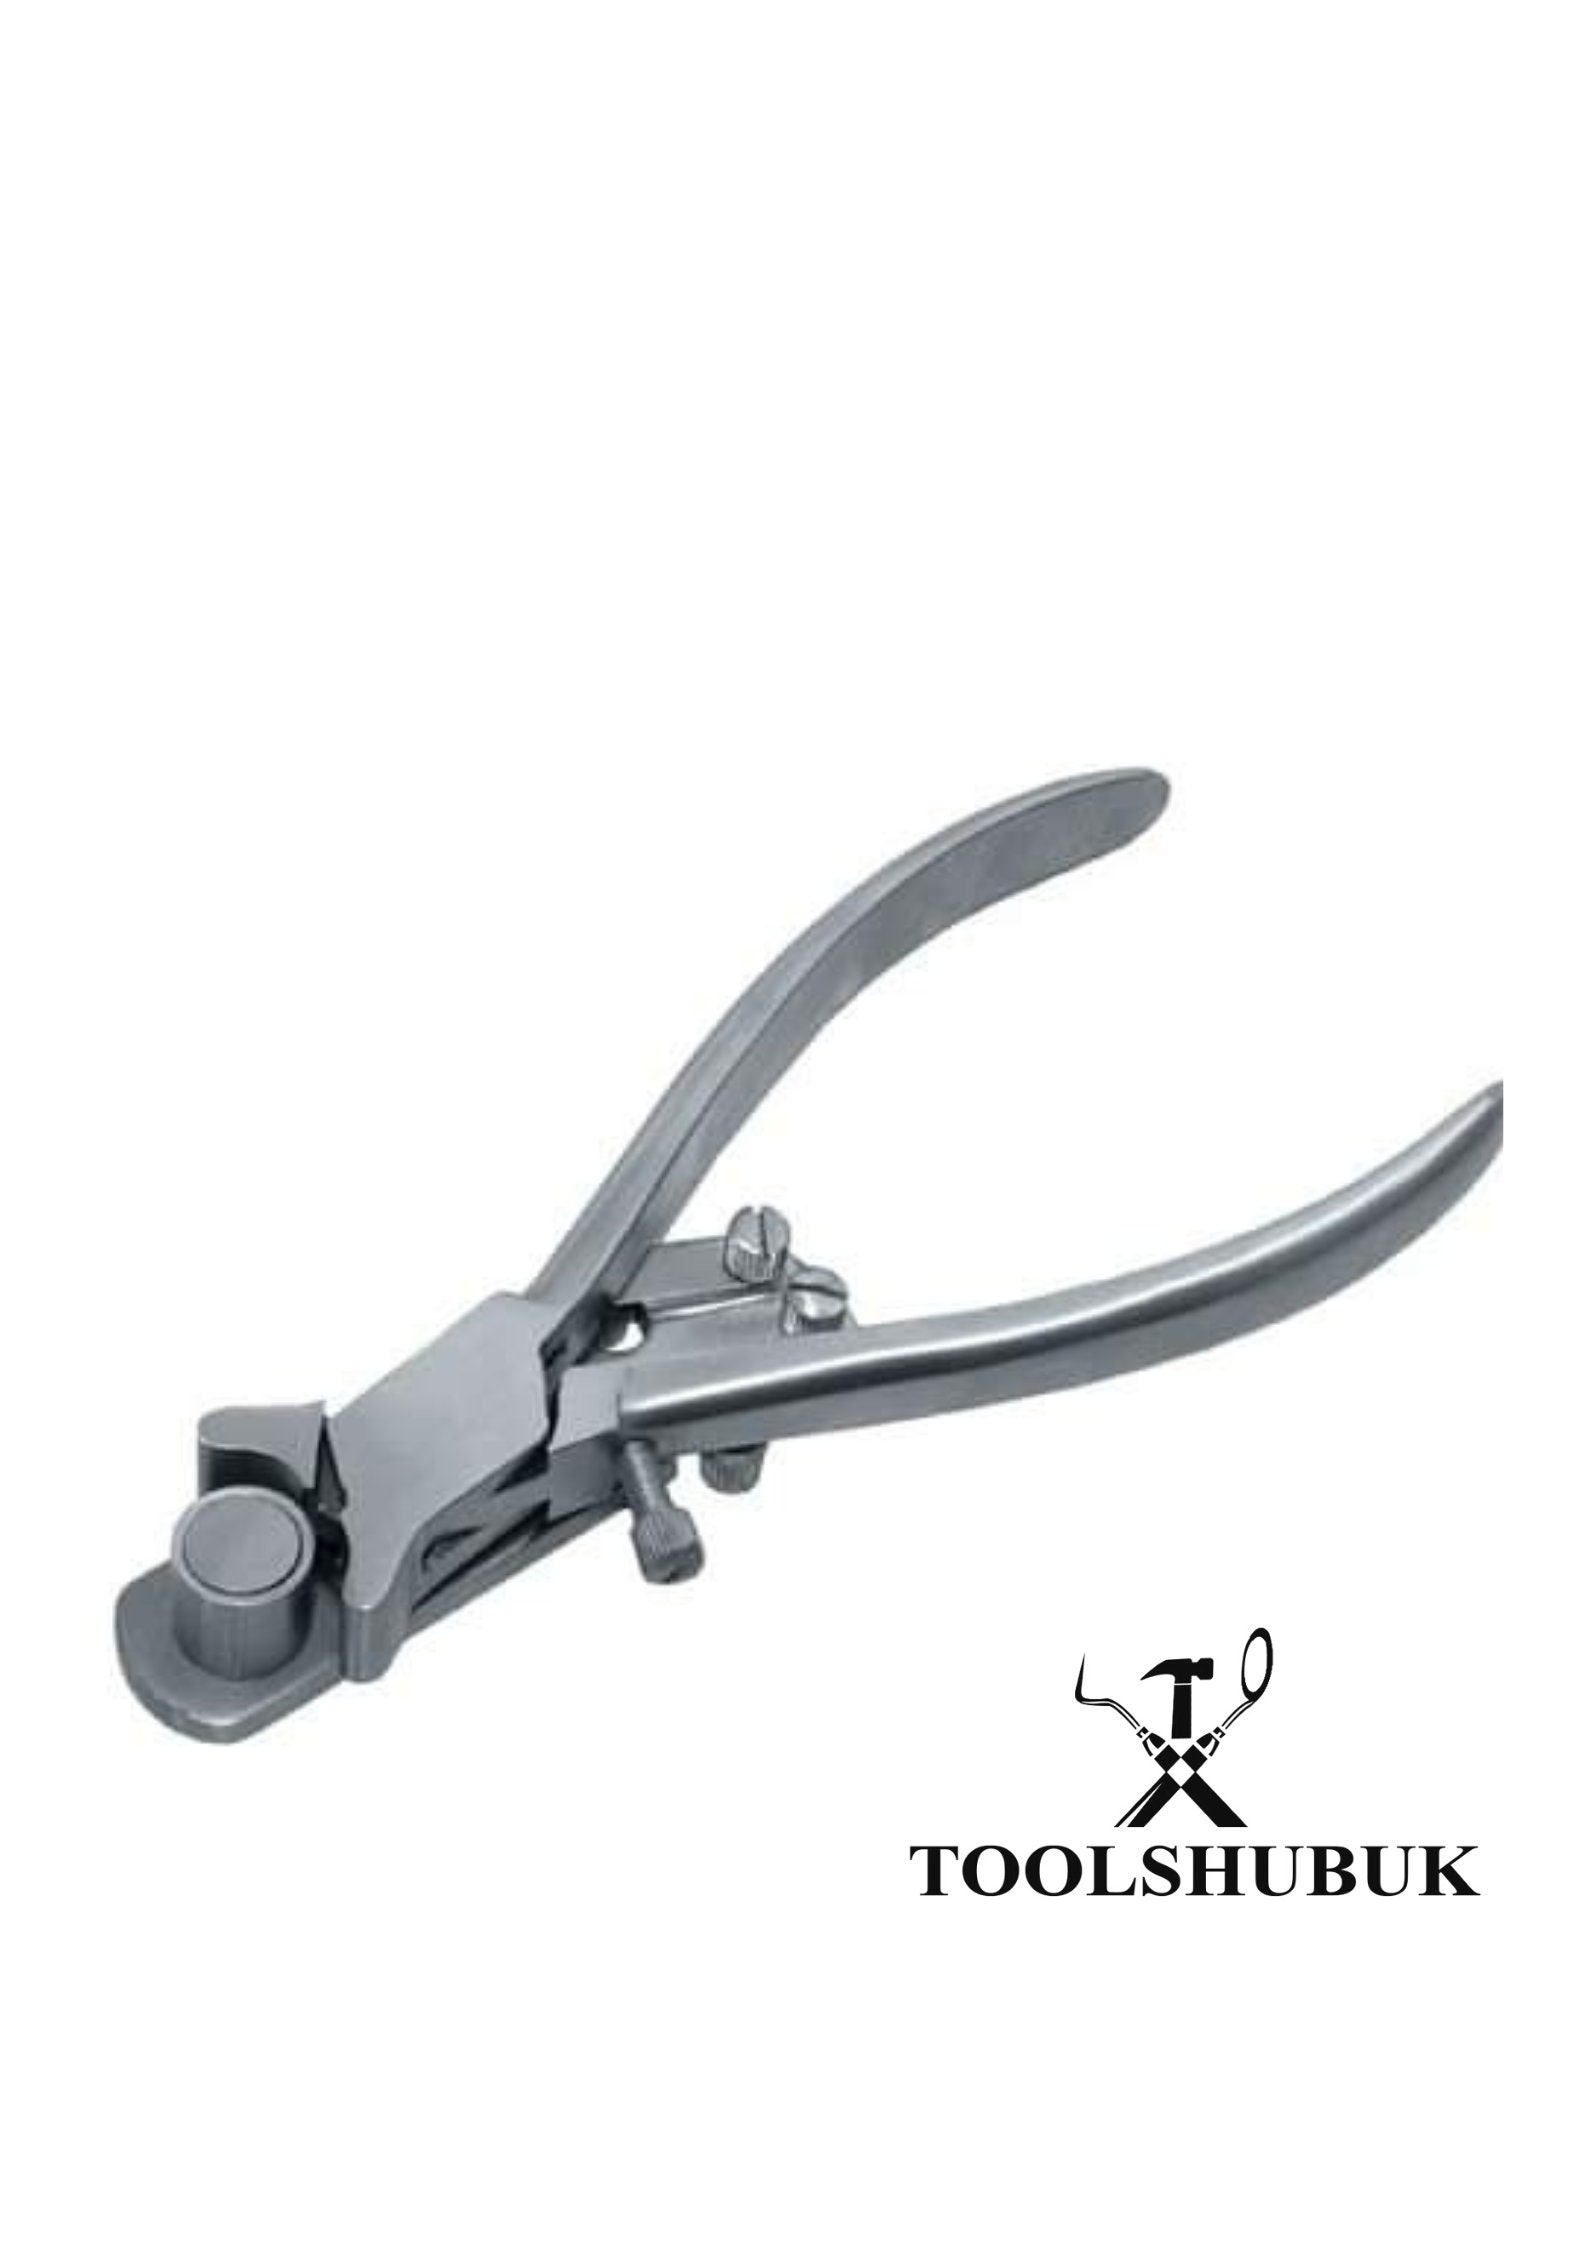 BIJ-874, KENT Jump Rings Coil Cutting Stainless Steel Pliers For 4.5mm to  9mm Ring Diameter